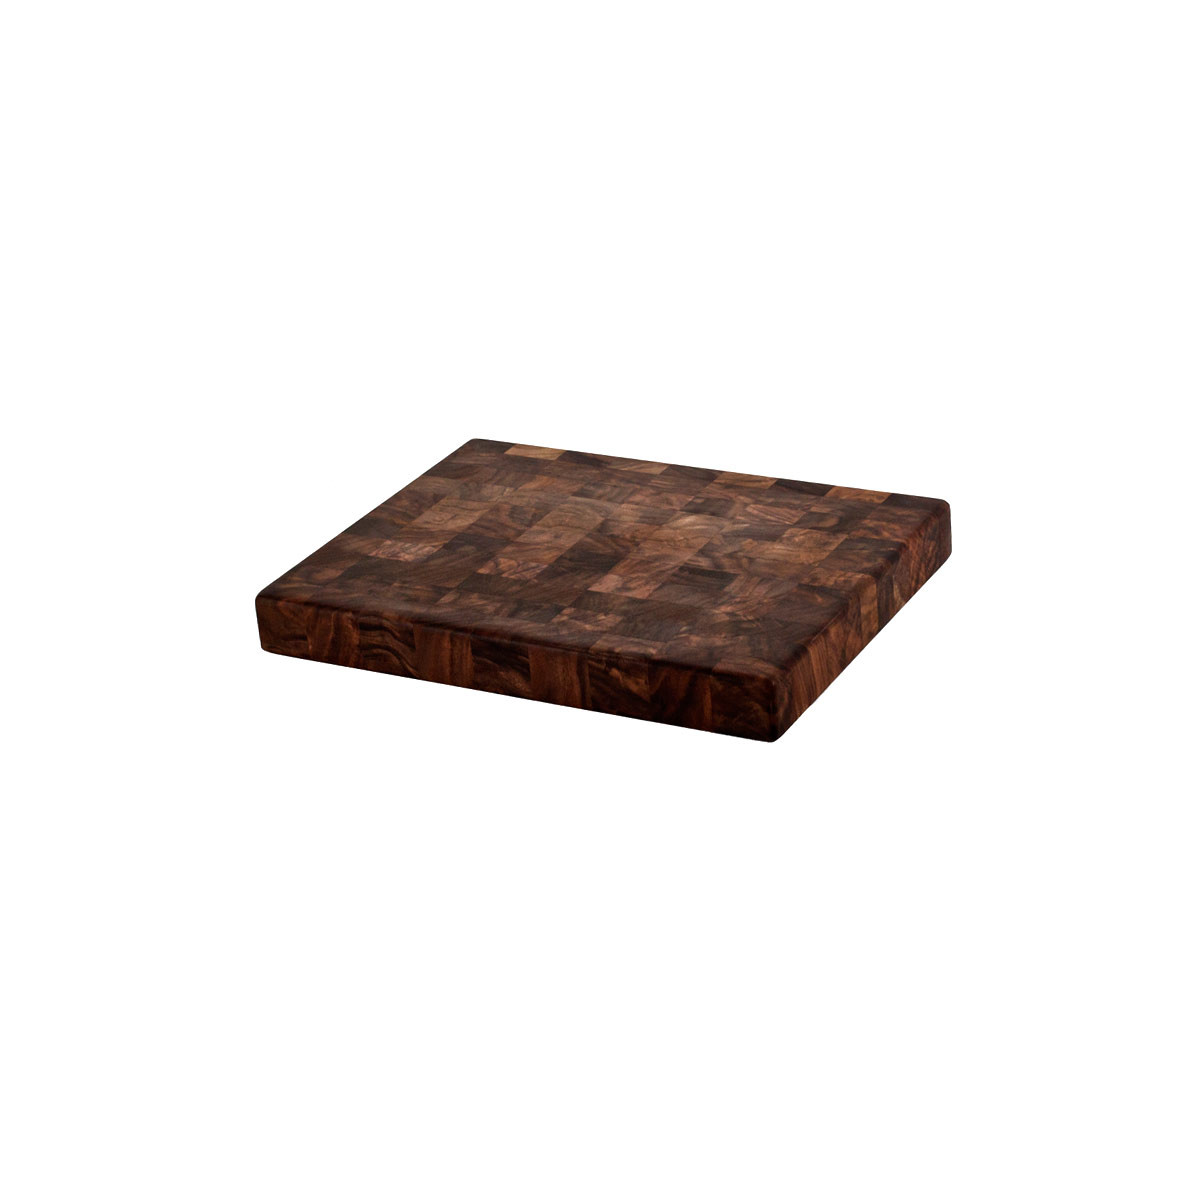 End Grain Chopping Block - 9x 12x 1-3/8 - Cutting Board Company -  Commercial Quality Plastic and Richlite Custom Sized Cutting Boards